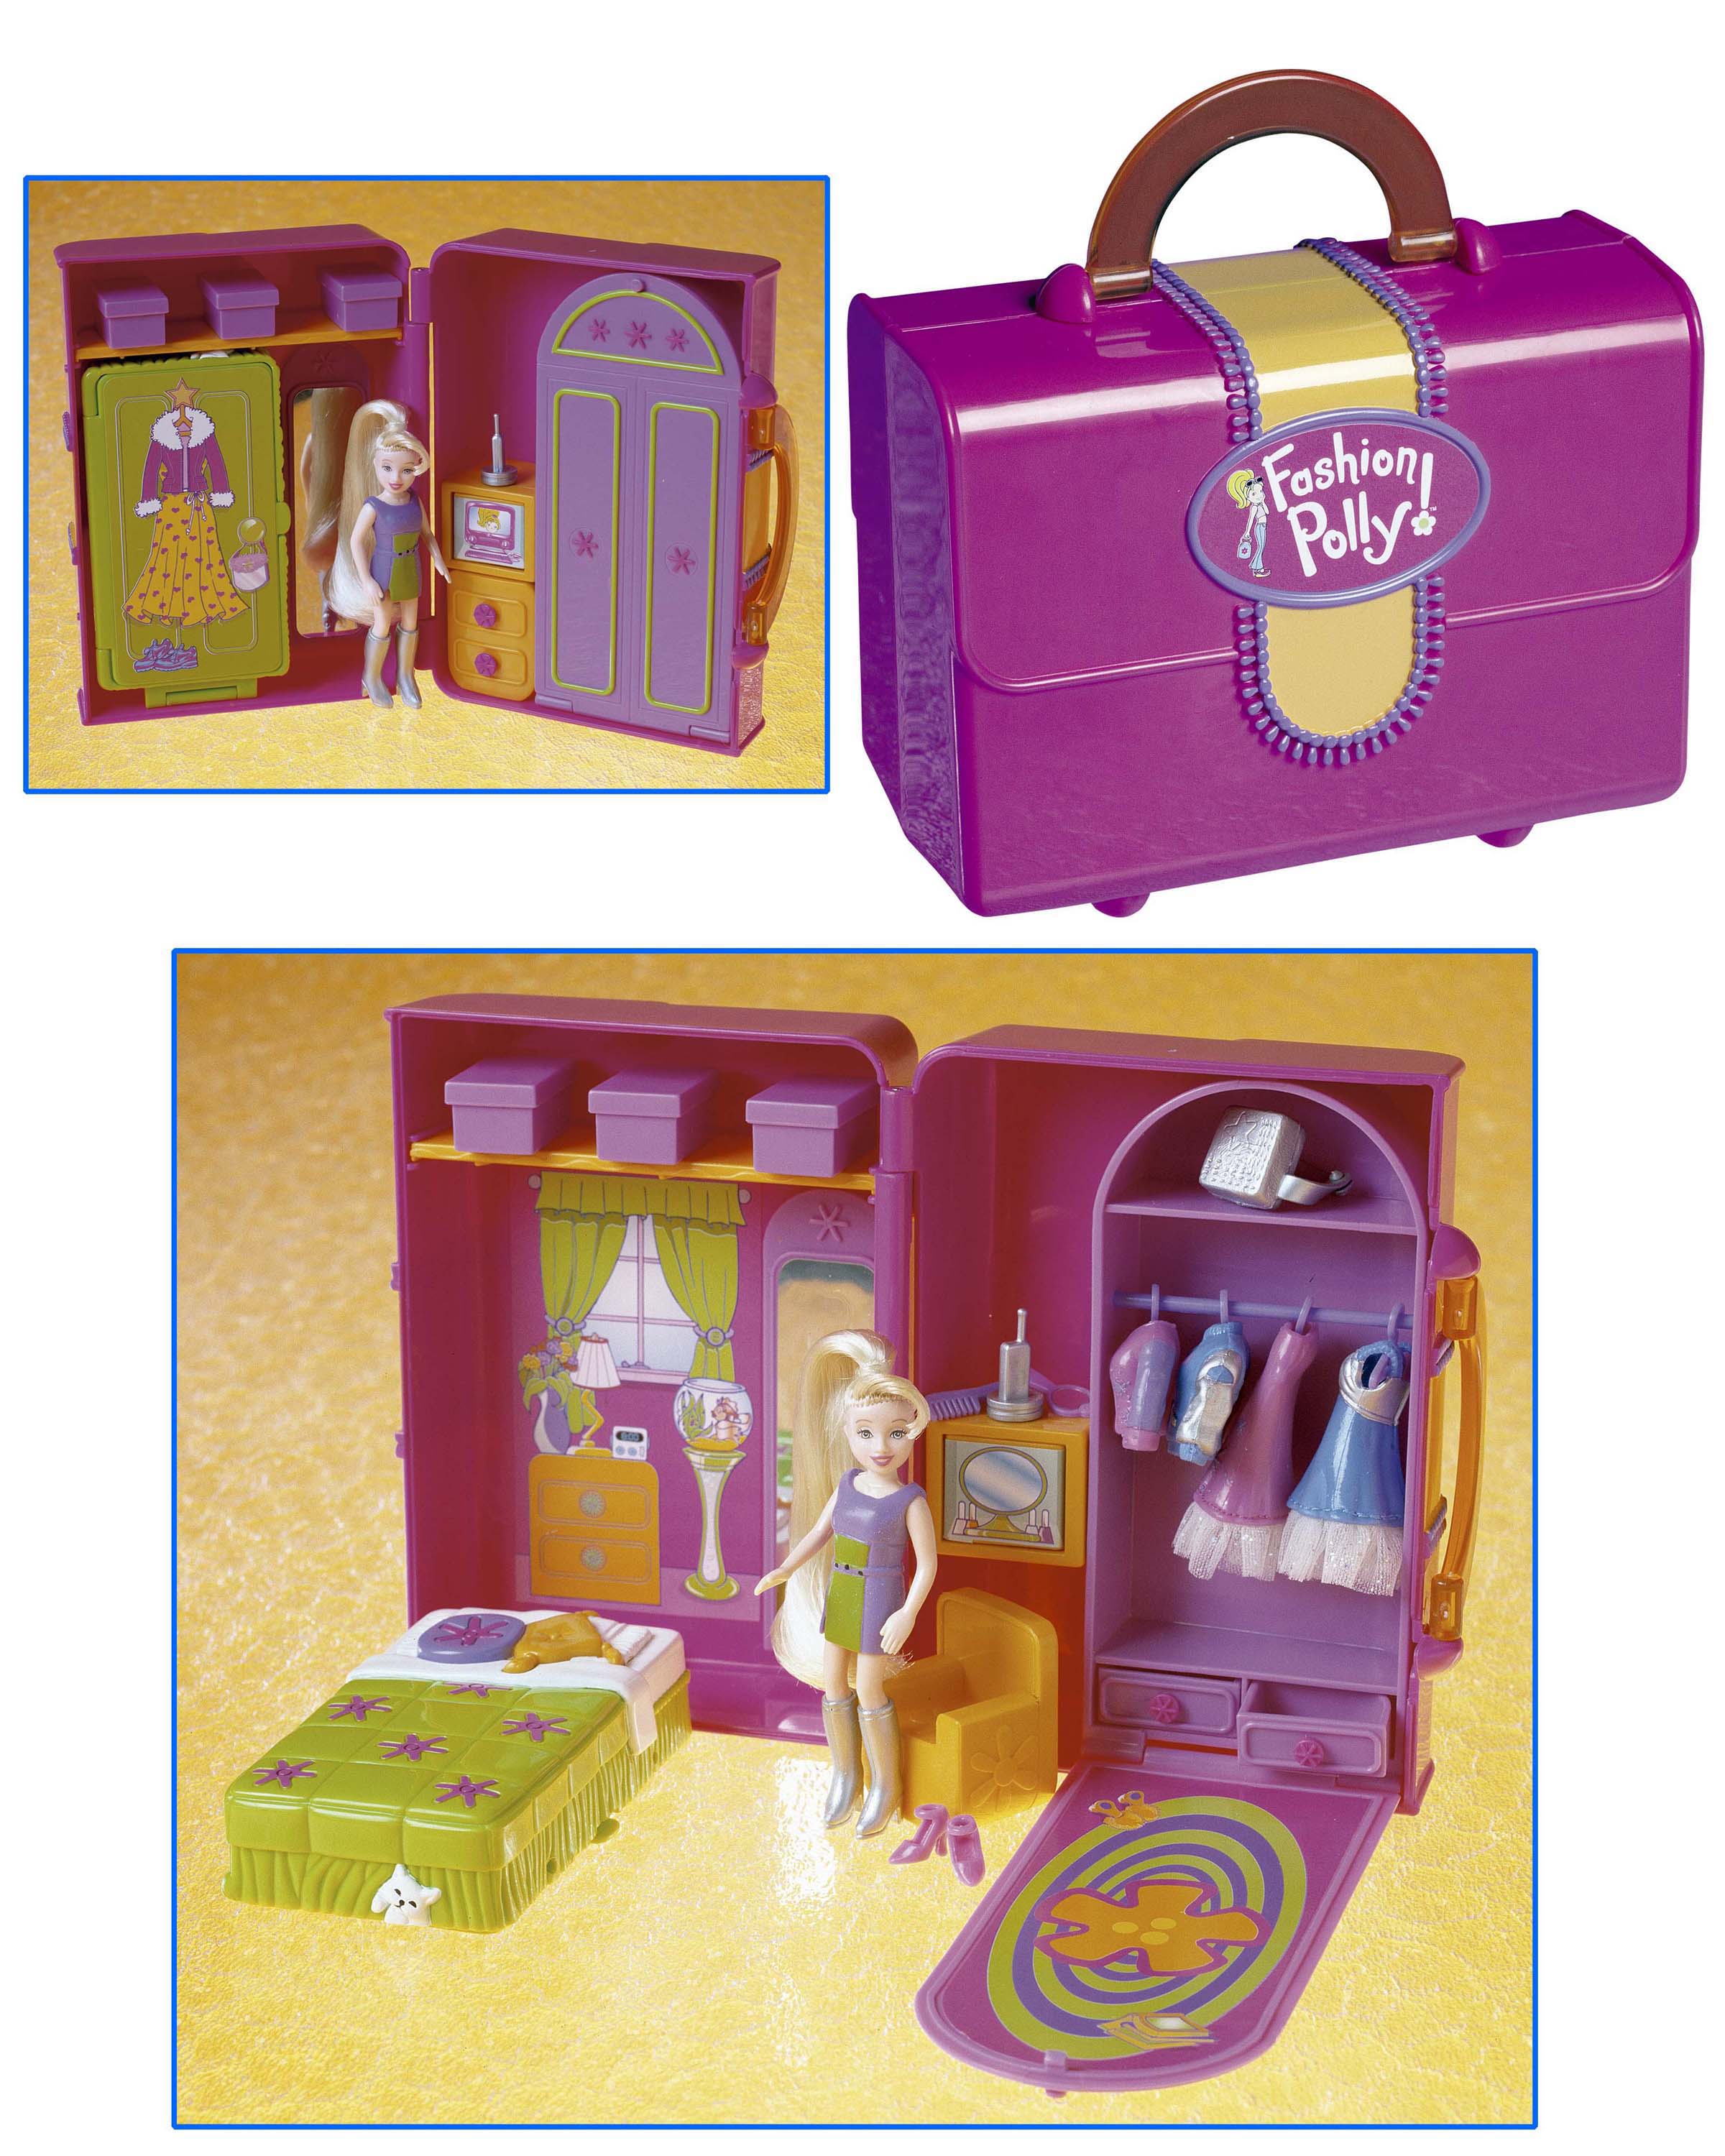 Polly Pocket dolls, like those pictured, came in compact plastic cases that unfolded into dollhouses. Mattel announced a ‘Polly Pocket’ film directed by Lena Dunham in 2021